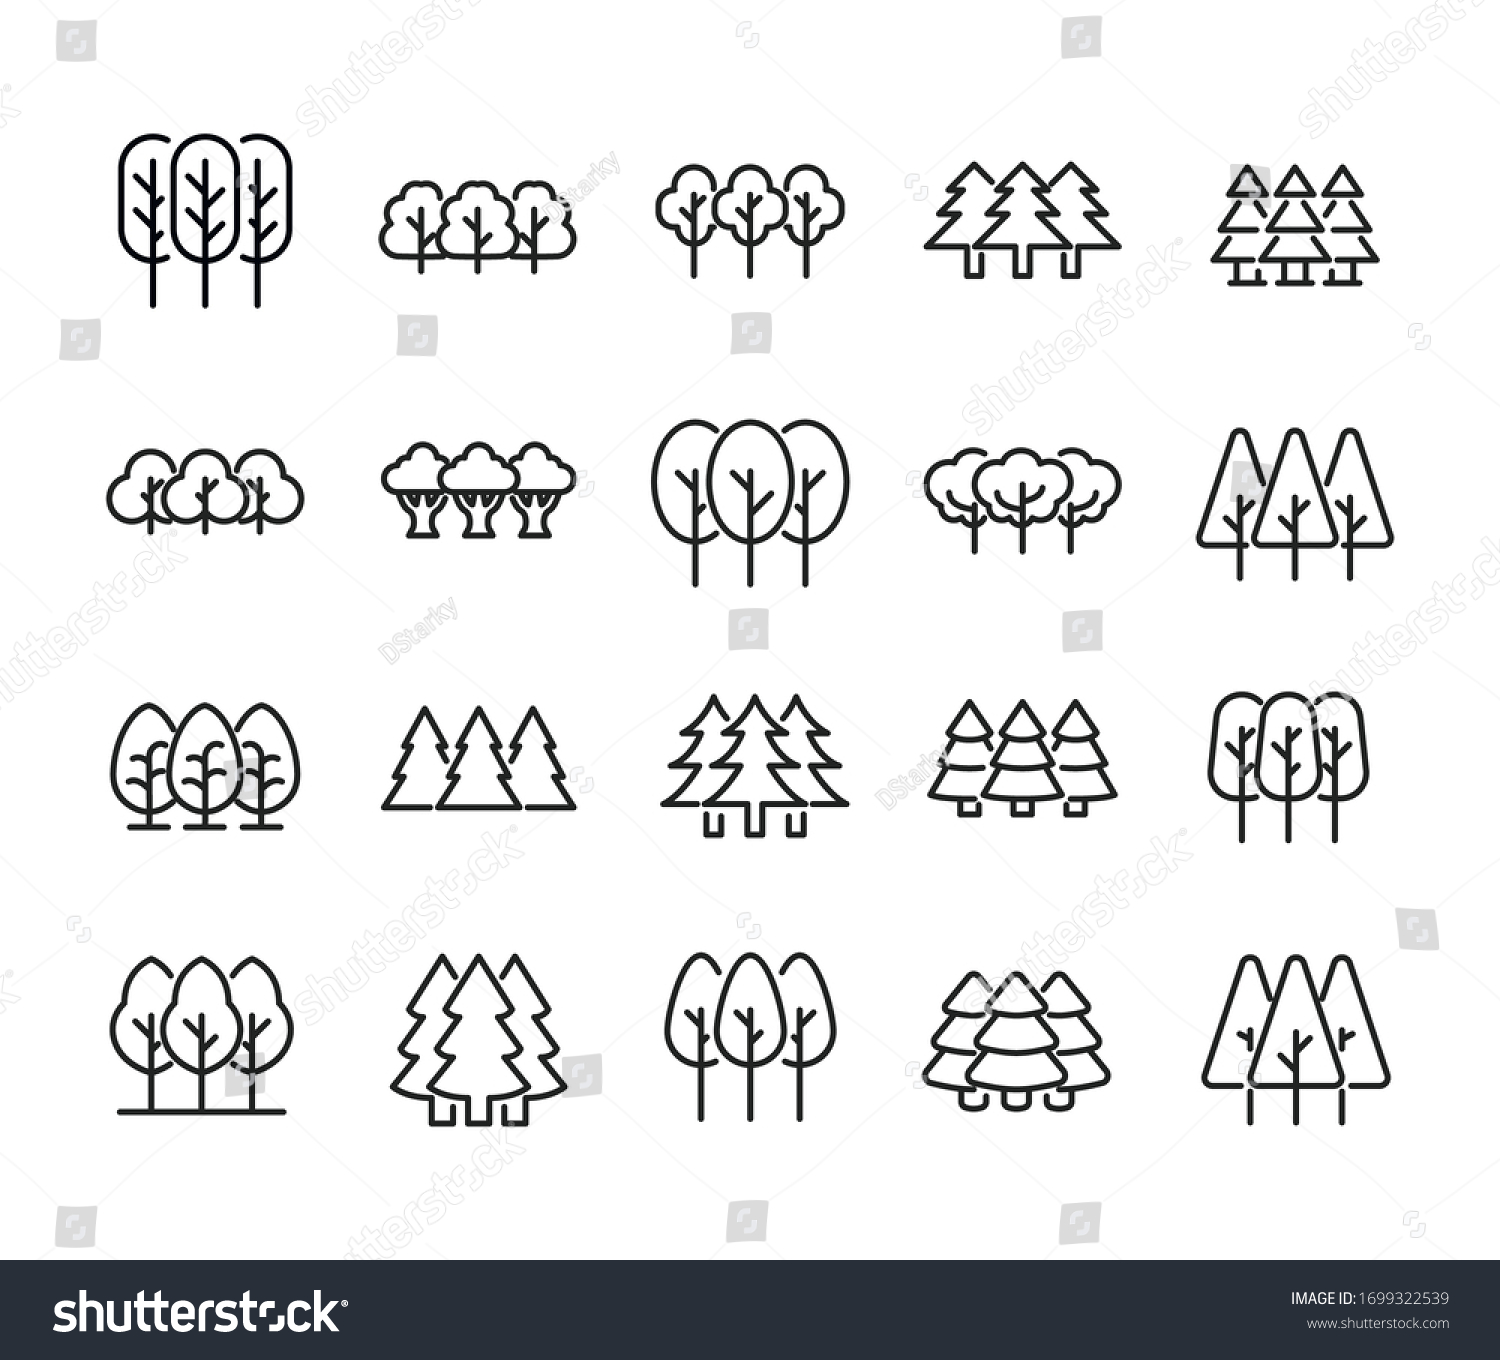 SVG of Icon set of forest. Editable vector pictograms isolated on a white background. Trendy outline symbols for mobile apps and website design. Premium pack of icons in trendy line style. svg